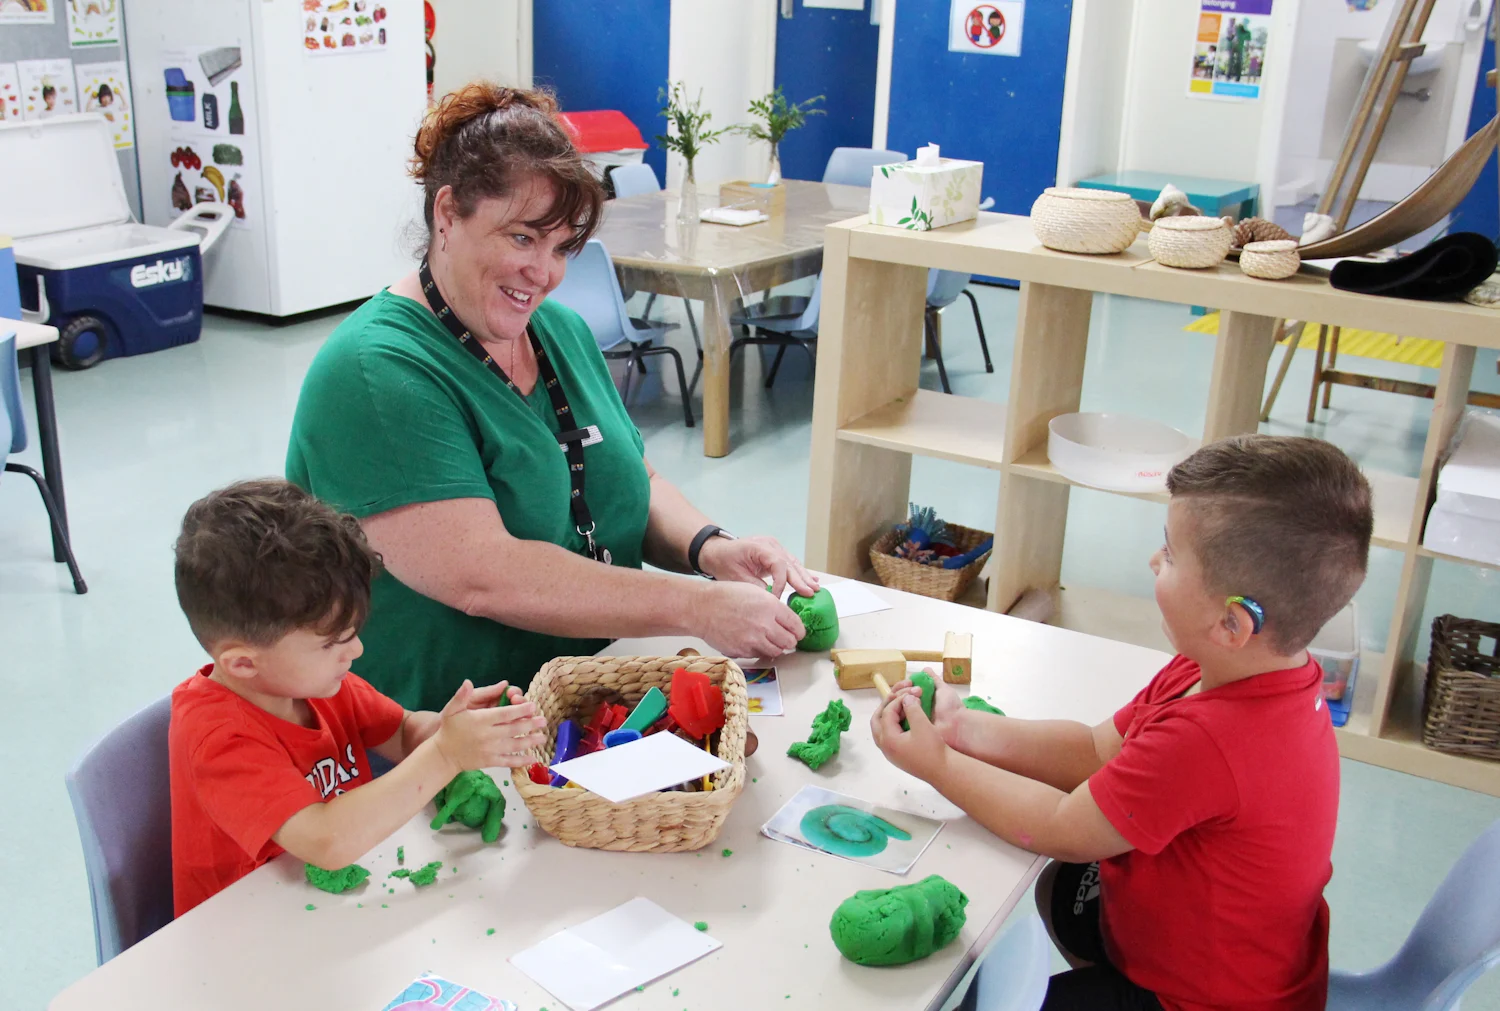 Child care and Preschool Georges Hall